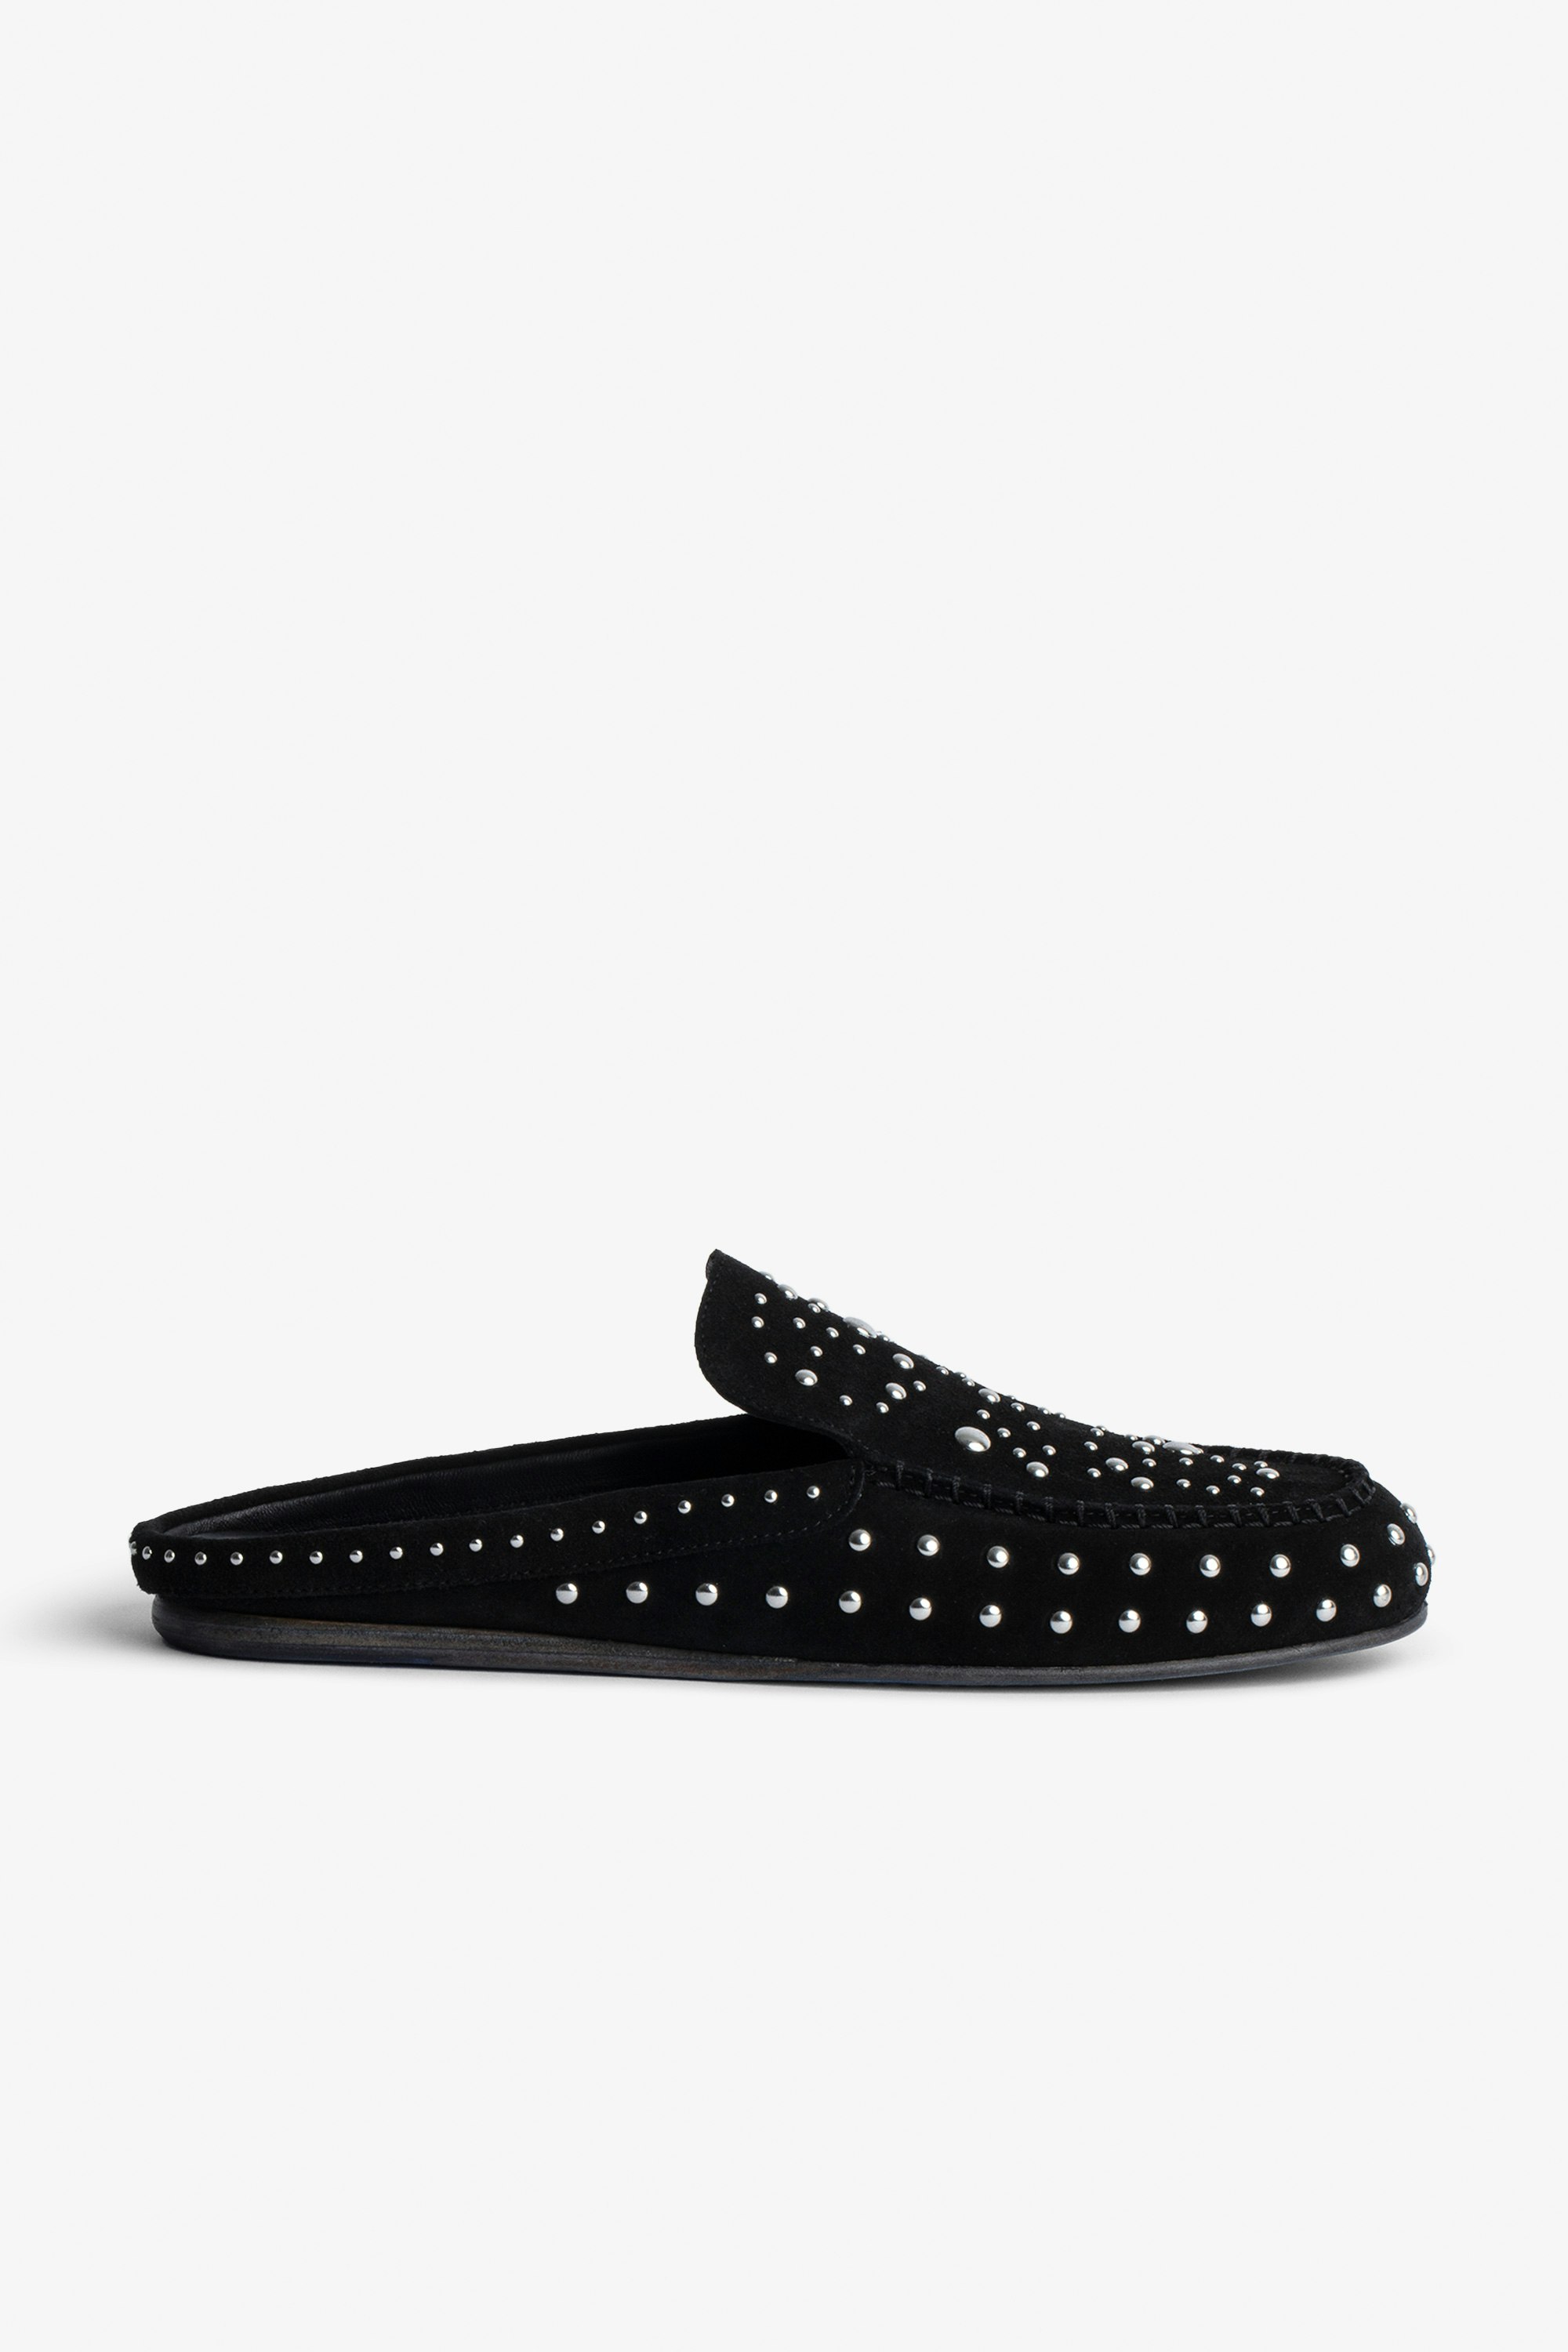 Sleeper Mules Women’s black suede mules with silver-tone studs and topstitching